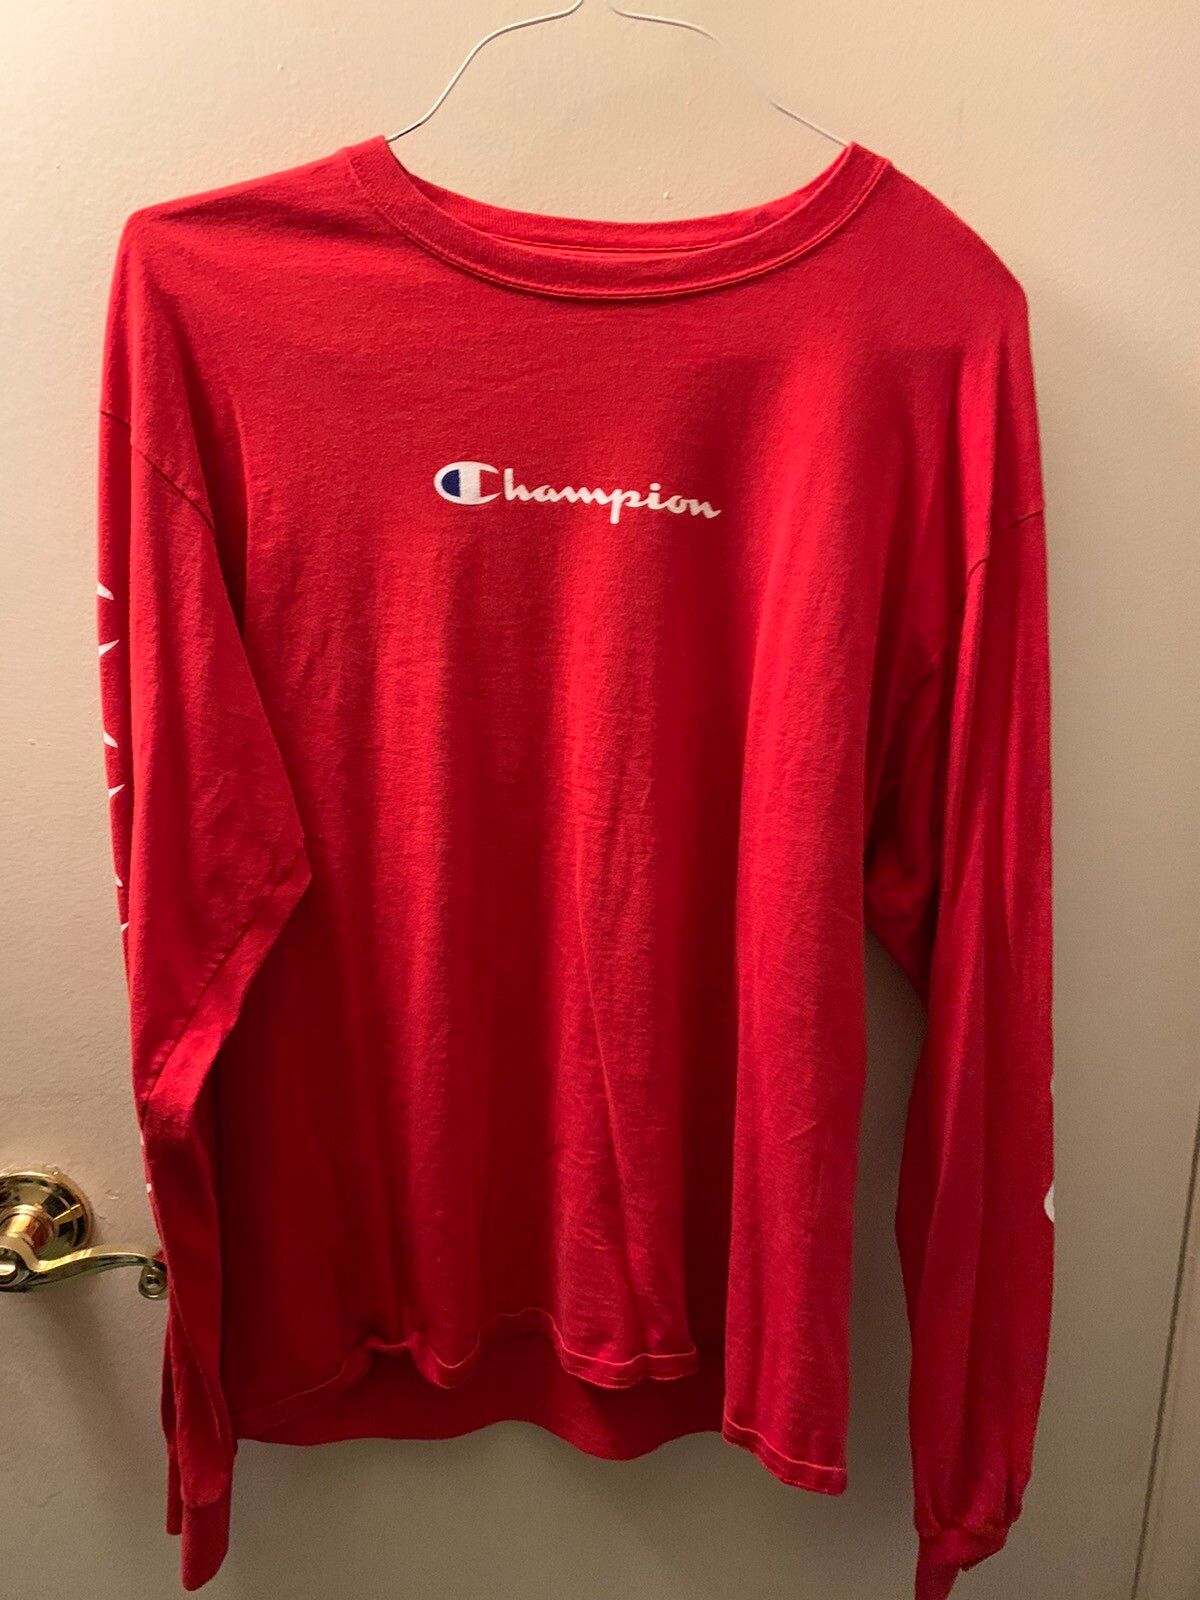 Champion Authentic Champion Long Sleeve | Grailed